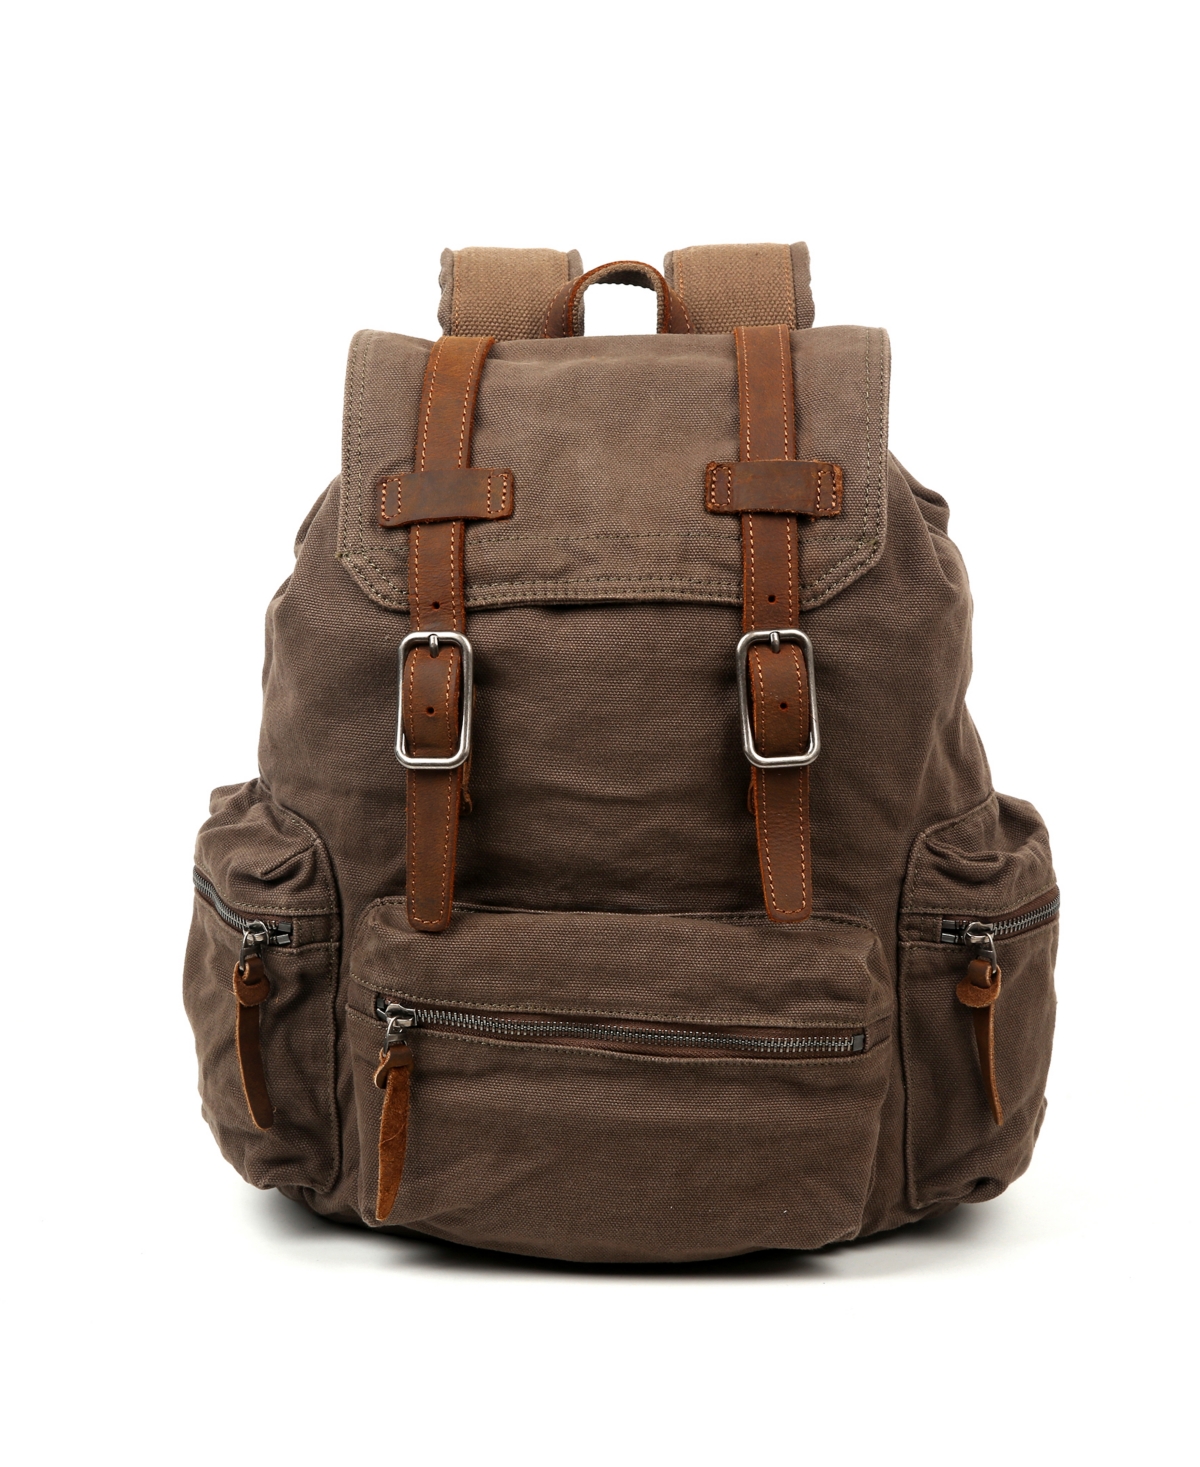 Silent Trail Canvas Backpack - Camel